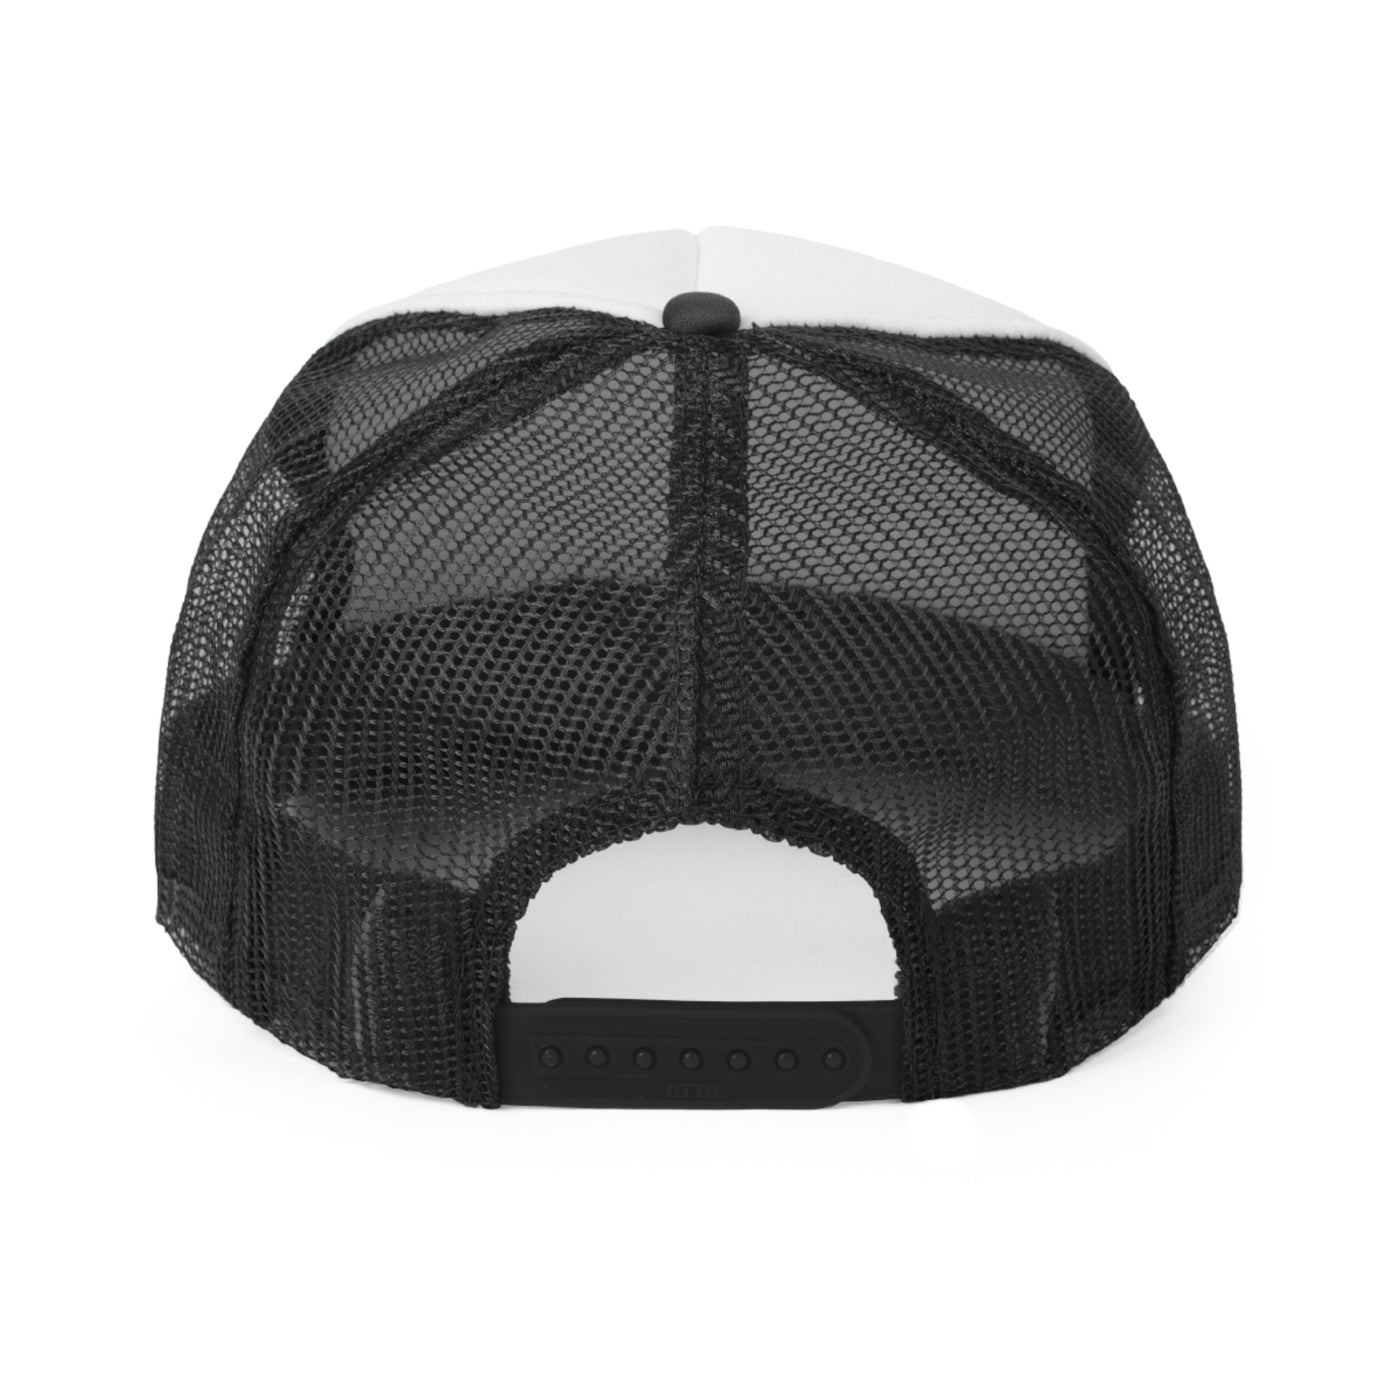 Standard Issue - Black/White Trucker Cap - Conquering Barbell